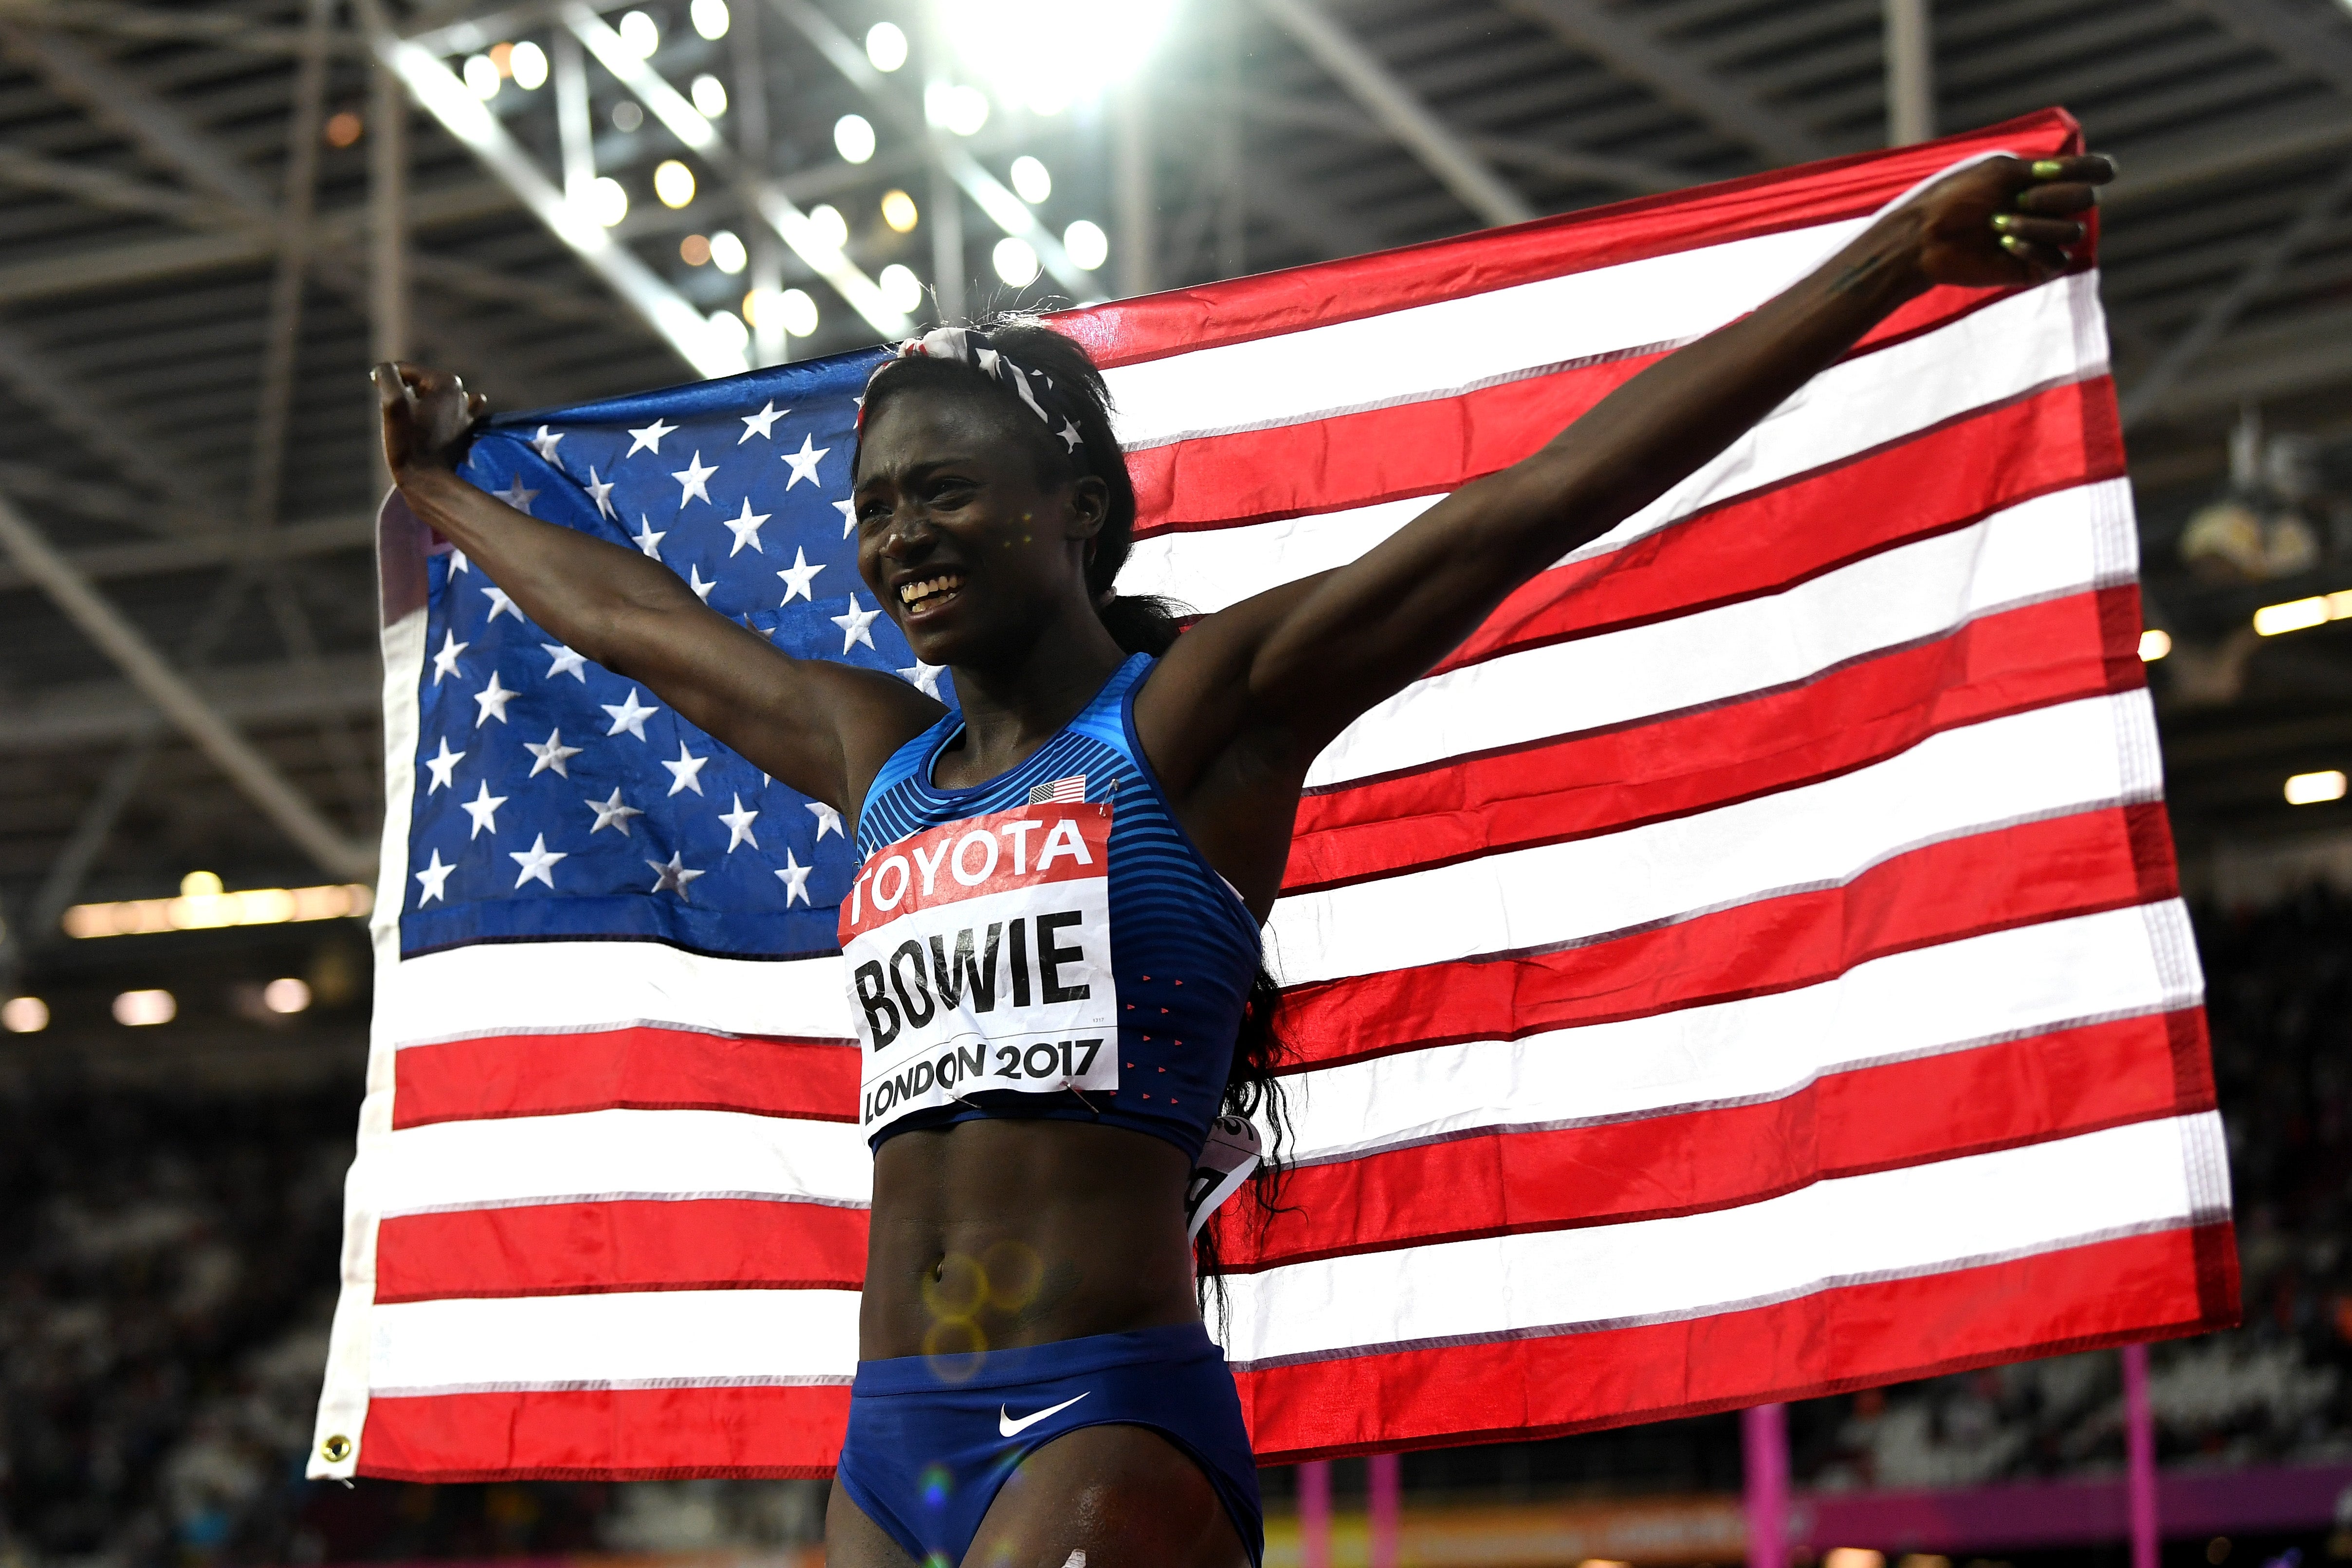 Bowie celebrates winning gold in the Women's 100 Metres Final at the 16th IAAF World Athletics Championships London in 2017